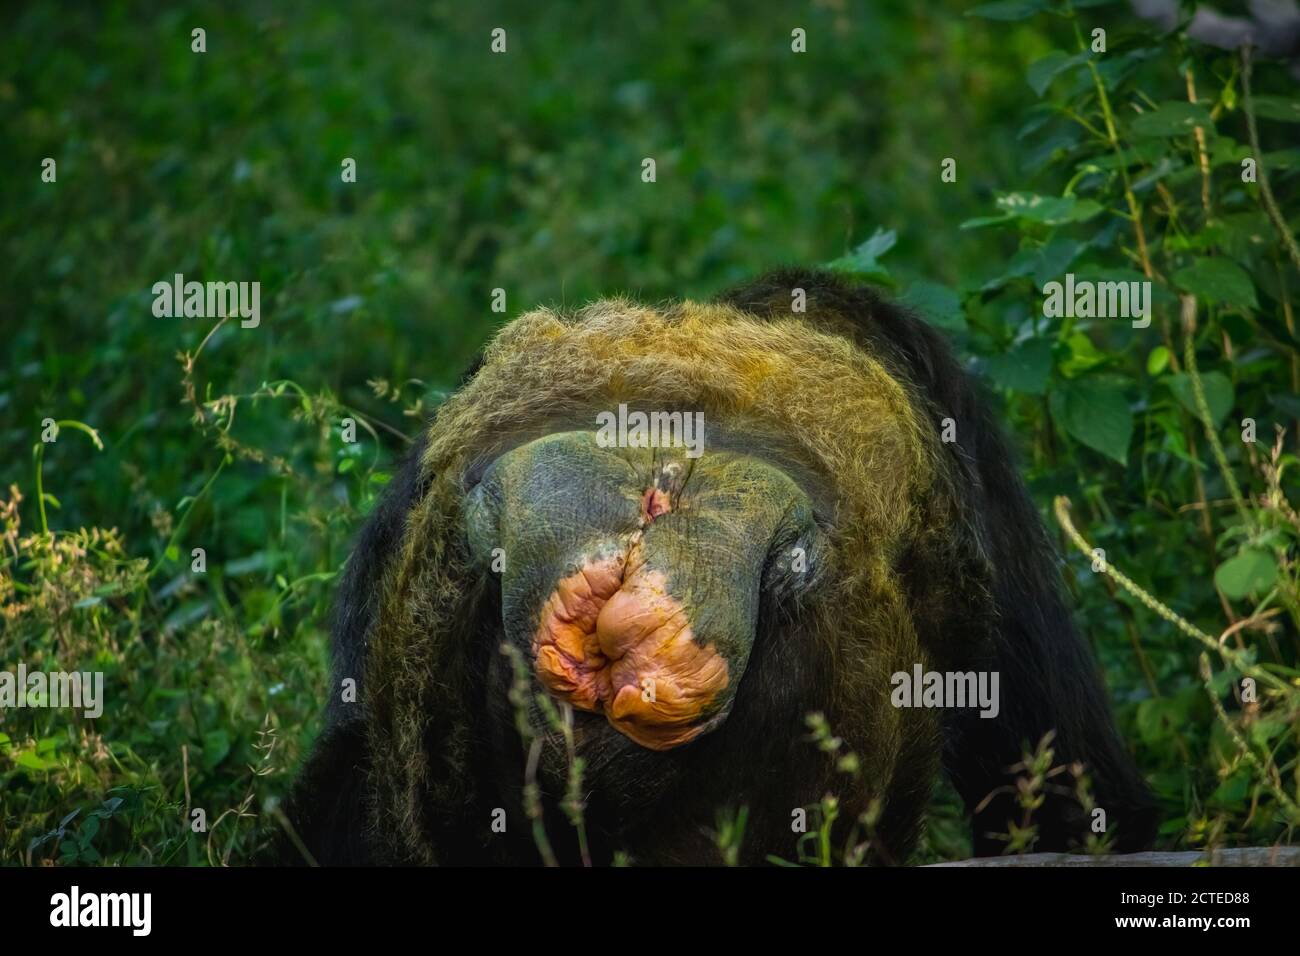 Young gigantic female Chimpanzee showing her private part in Outdoor Habitat forest jungle. Chimpanzee reproductive system. Monkey & Apes family Stock Photo